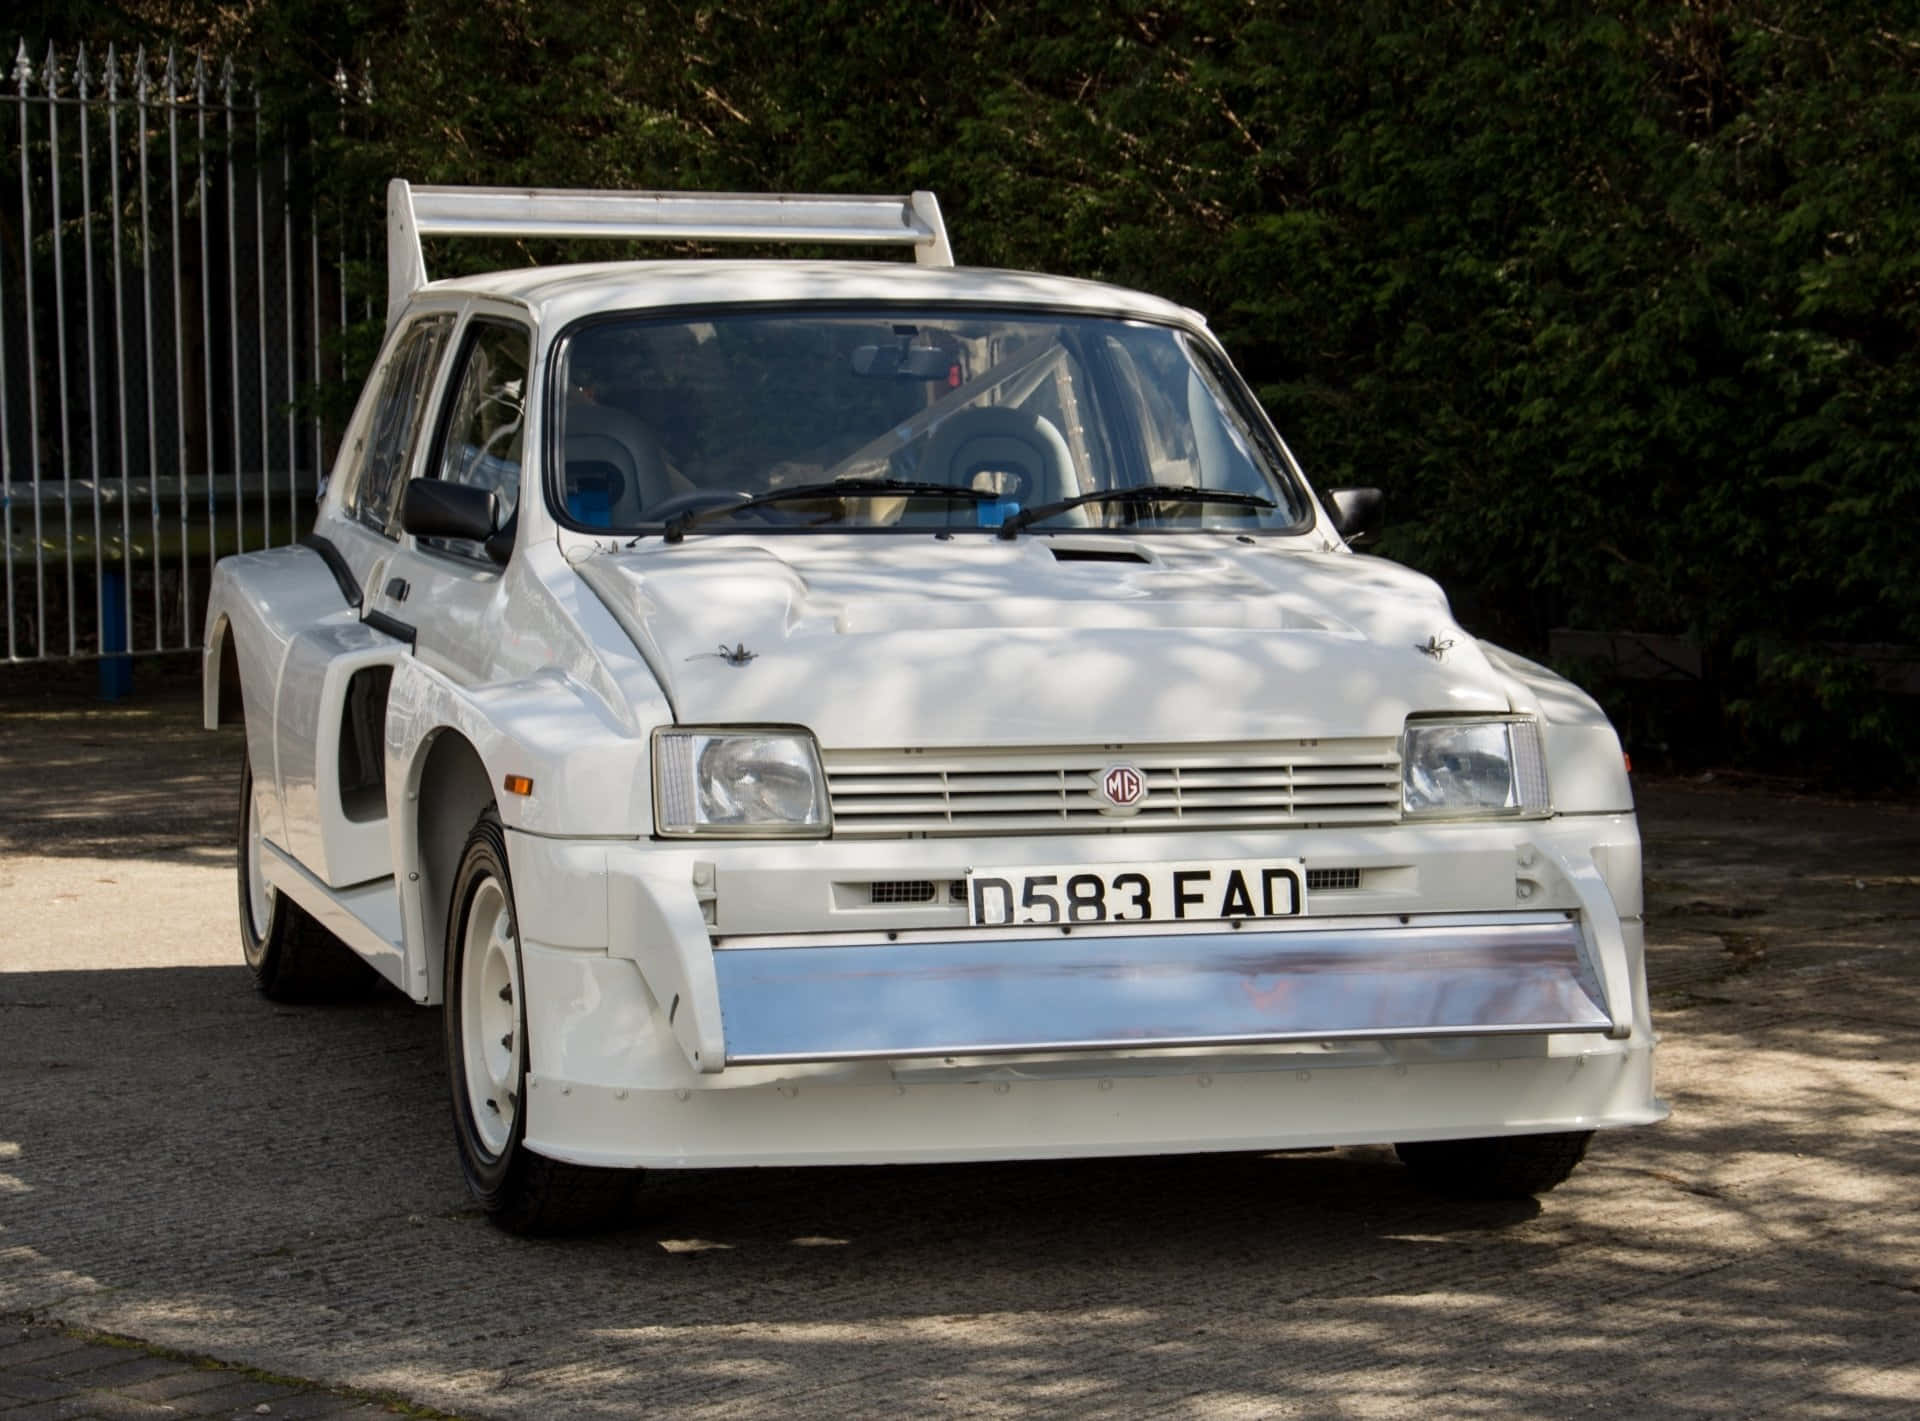 Mg Metro 6r4 - An Epitome Of Speed And Performance Wallpaper